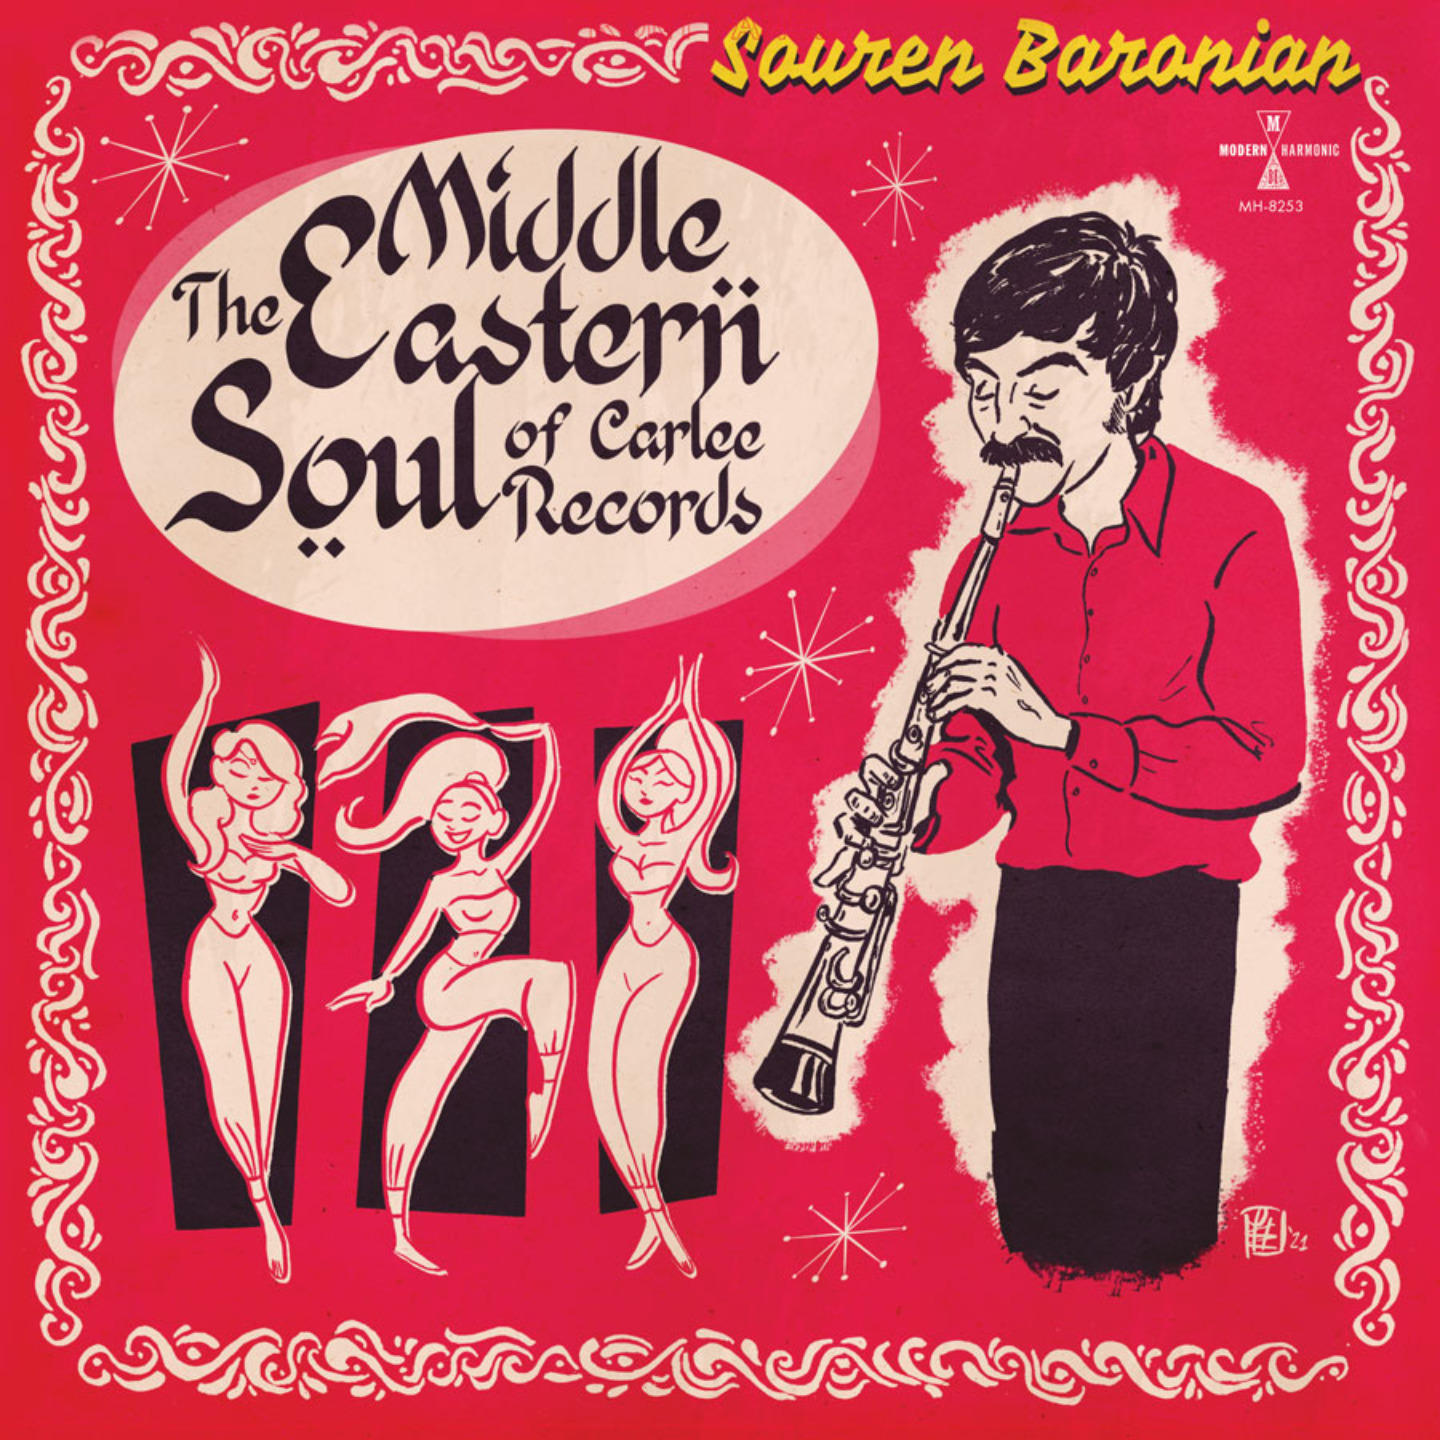 SOUREN BARONIAN - The Middle Eastern Soul Of Carlee Records 3xLP Translucent Gold Vinyl